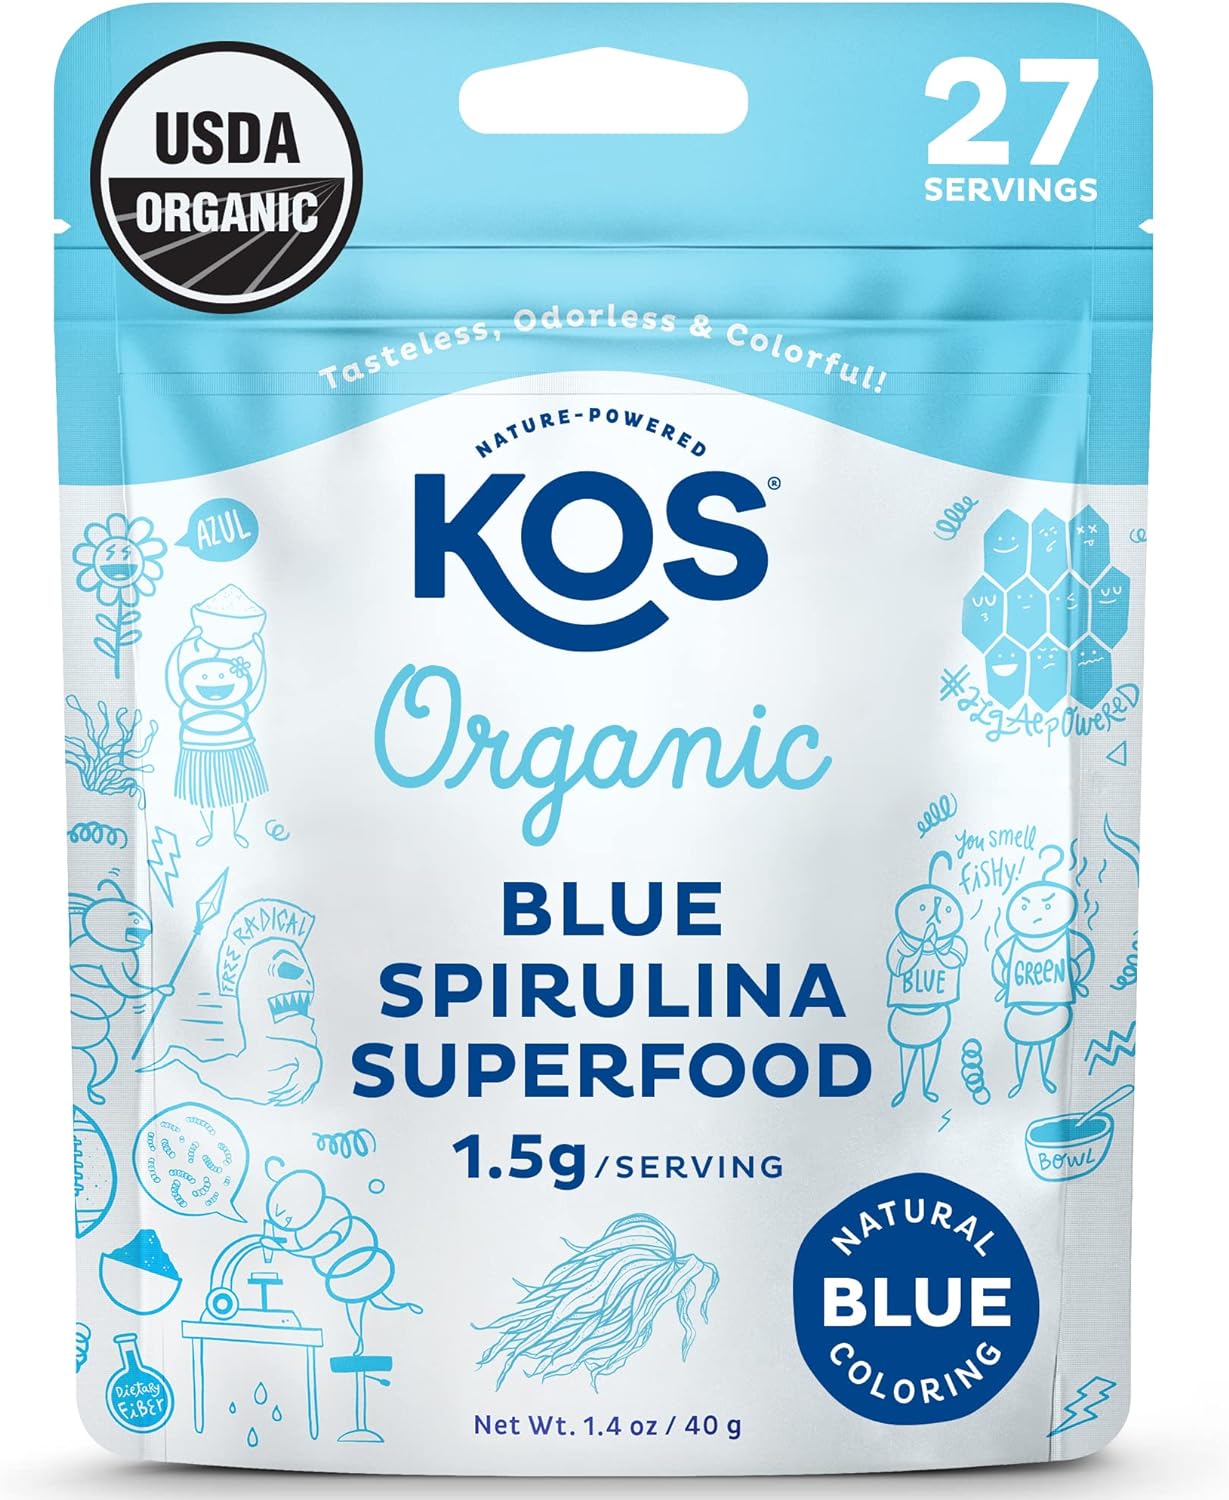 KOS USDA Organic Blue Spirulina Powder, Phycocyanin - Vegan Algae Superfood - Natural Food Coloring for Smoothies & Protein Drinks, Plant Based, Non GMO - 27 Servings